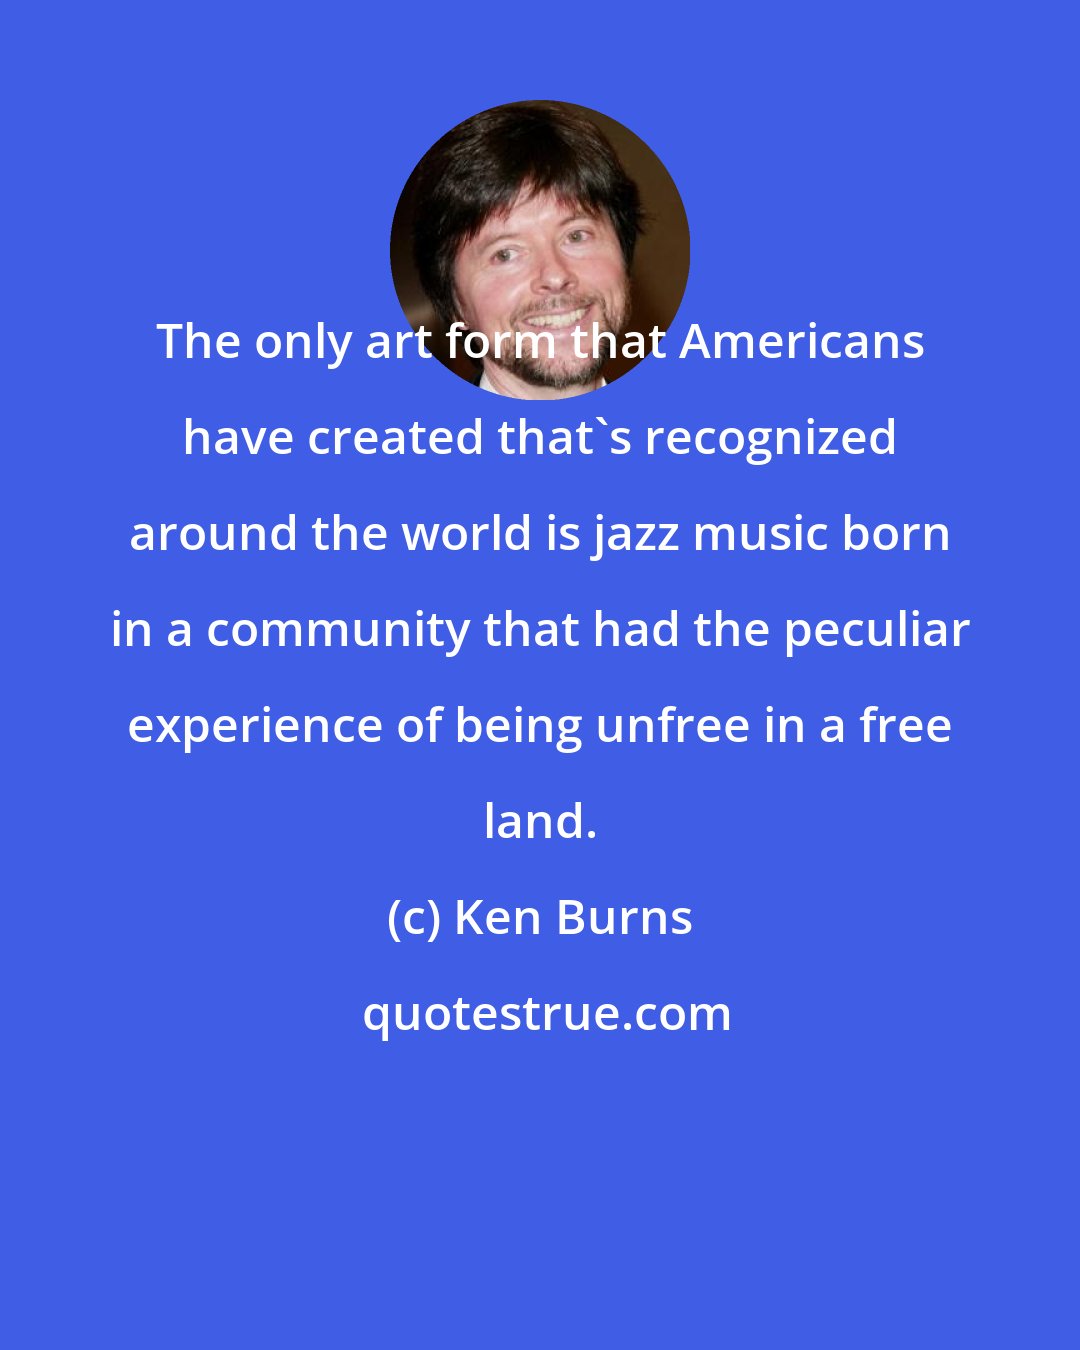 Ken Burns: The only art form that Americans have created that's recognized around the world is jazz music born in a community that had the peculiar experience of being unfree in a free land.